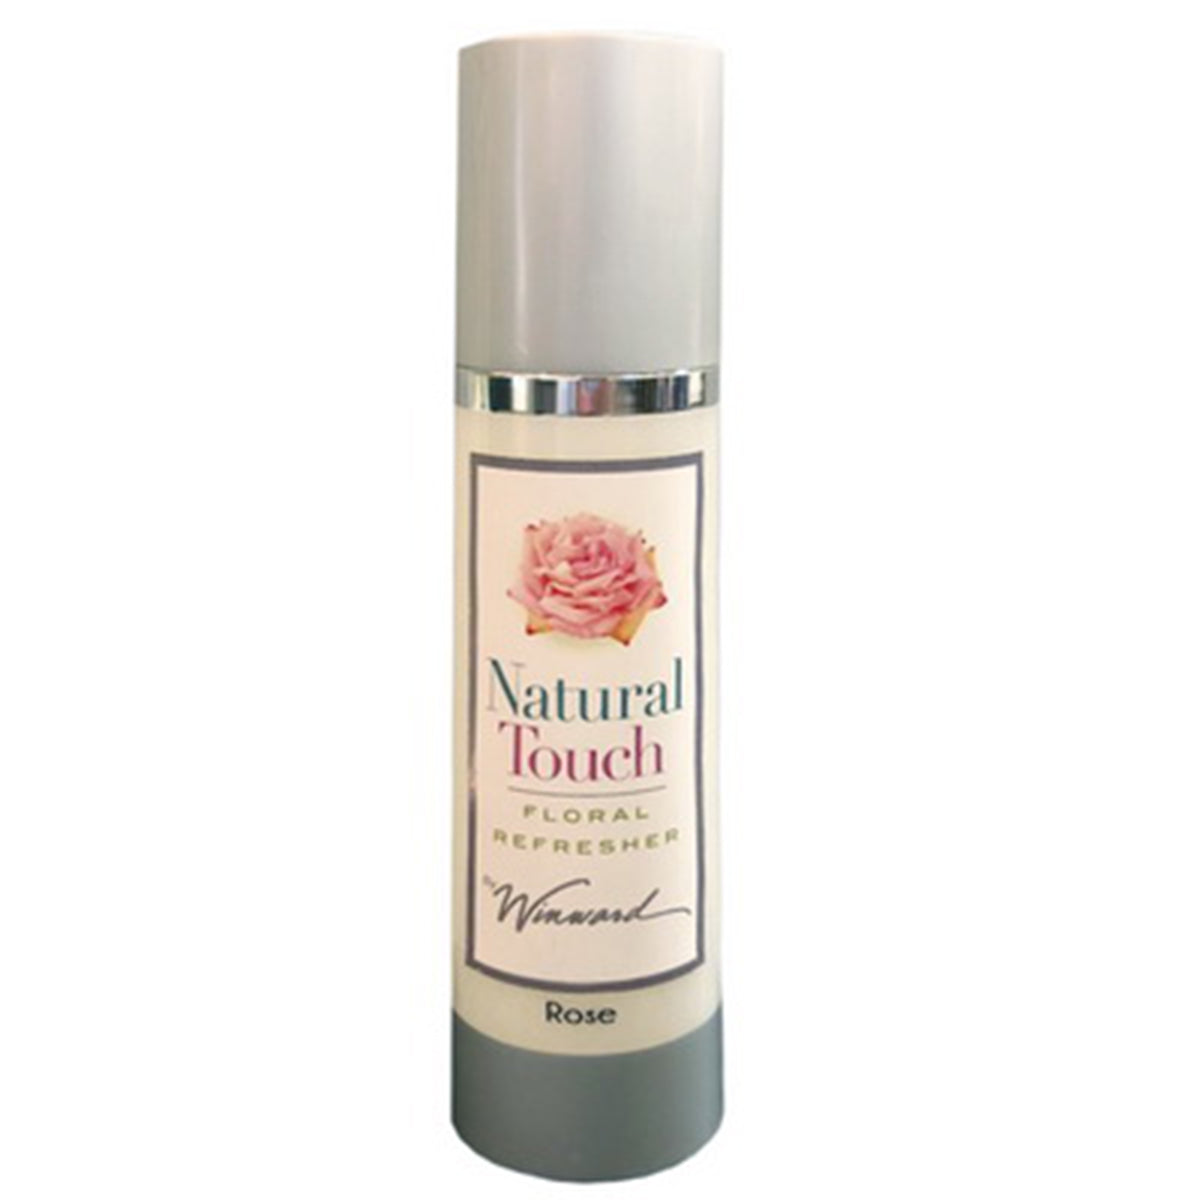 Winward Rose Natural Touch Refresher